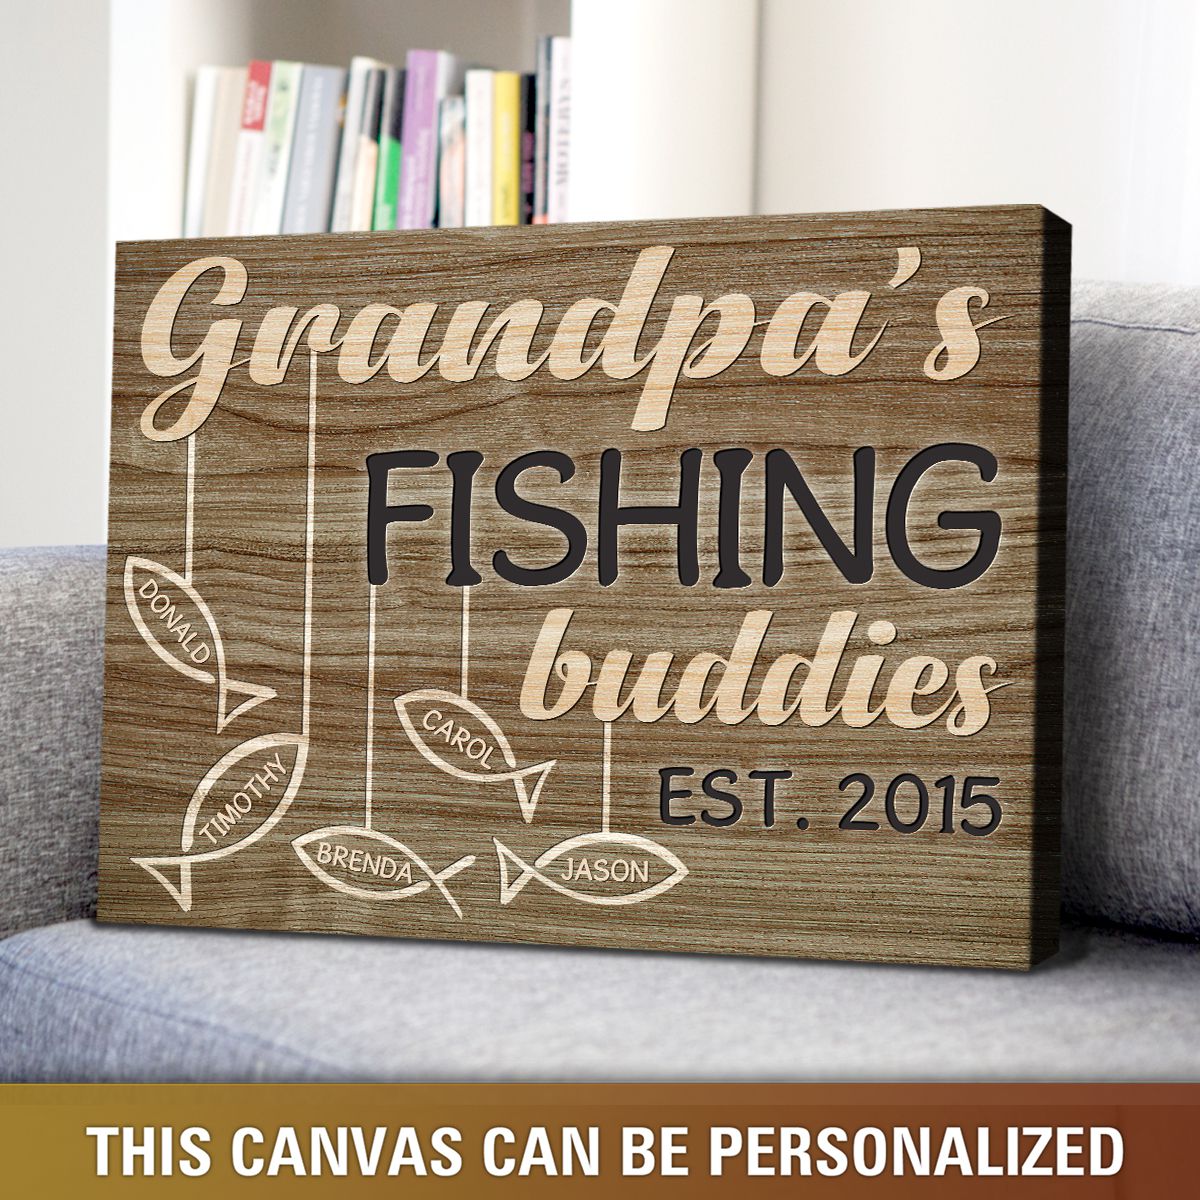 https://images.ohcanvas.com/ohcanvas_com/2022/05/31030249/grandpas-fishing-buddy-fathers-day-gift-for-grandpa-personalized-grandpa-gift.jpg